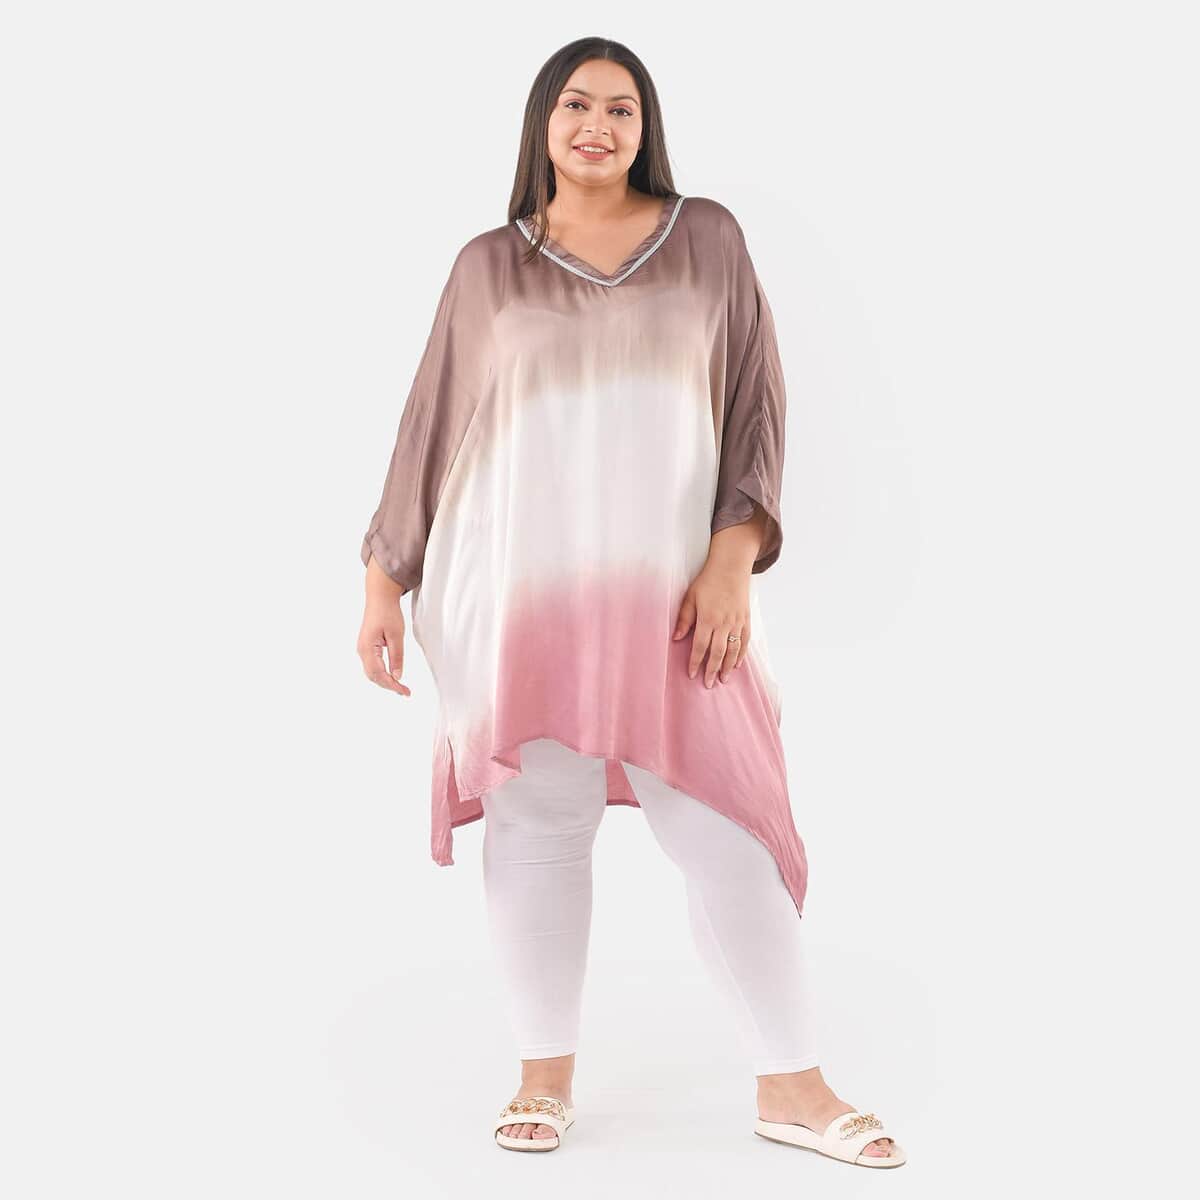 Tamsy Brown Ombre Dye V-Neck with Lace Tunic - One Size fits Most image number 0